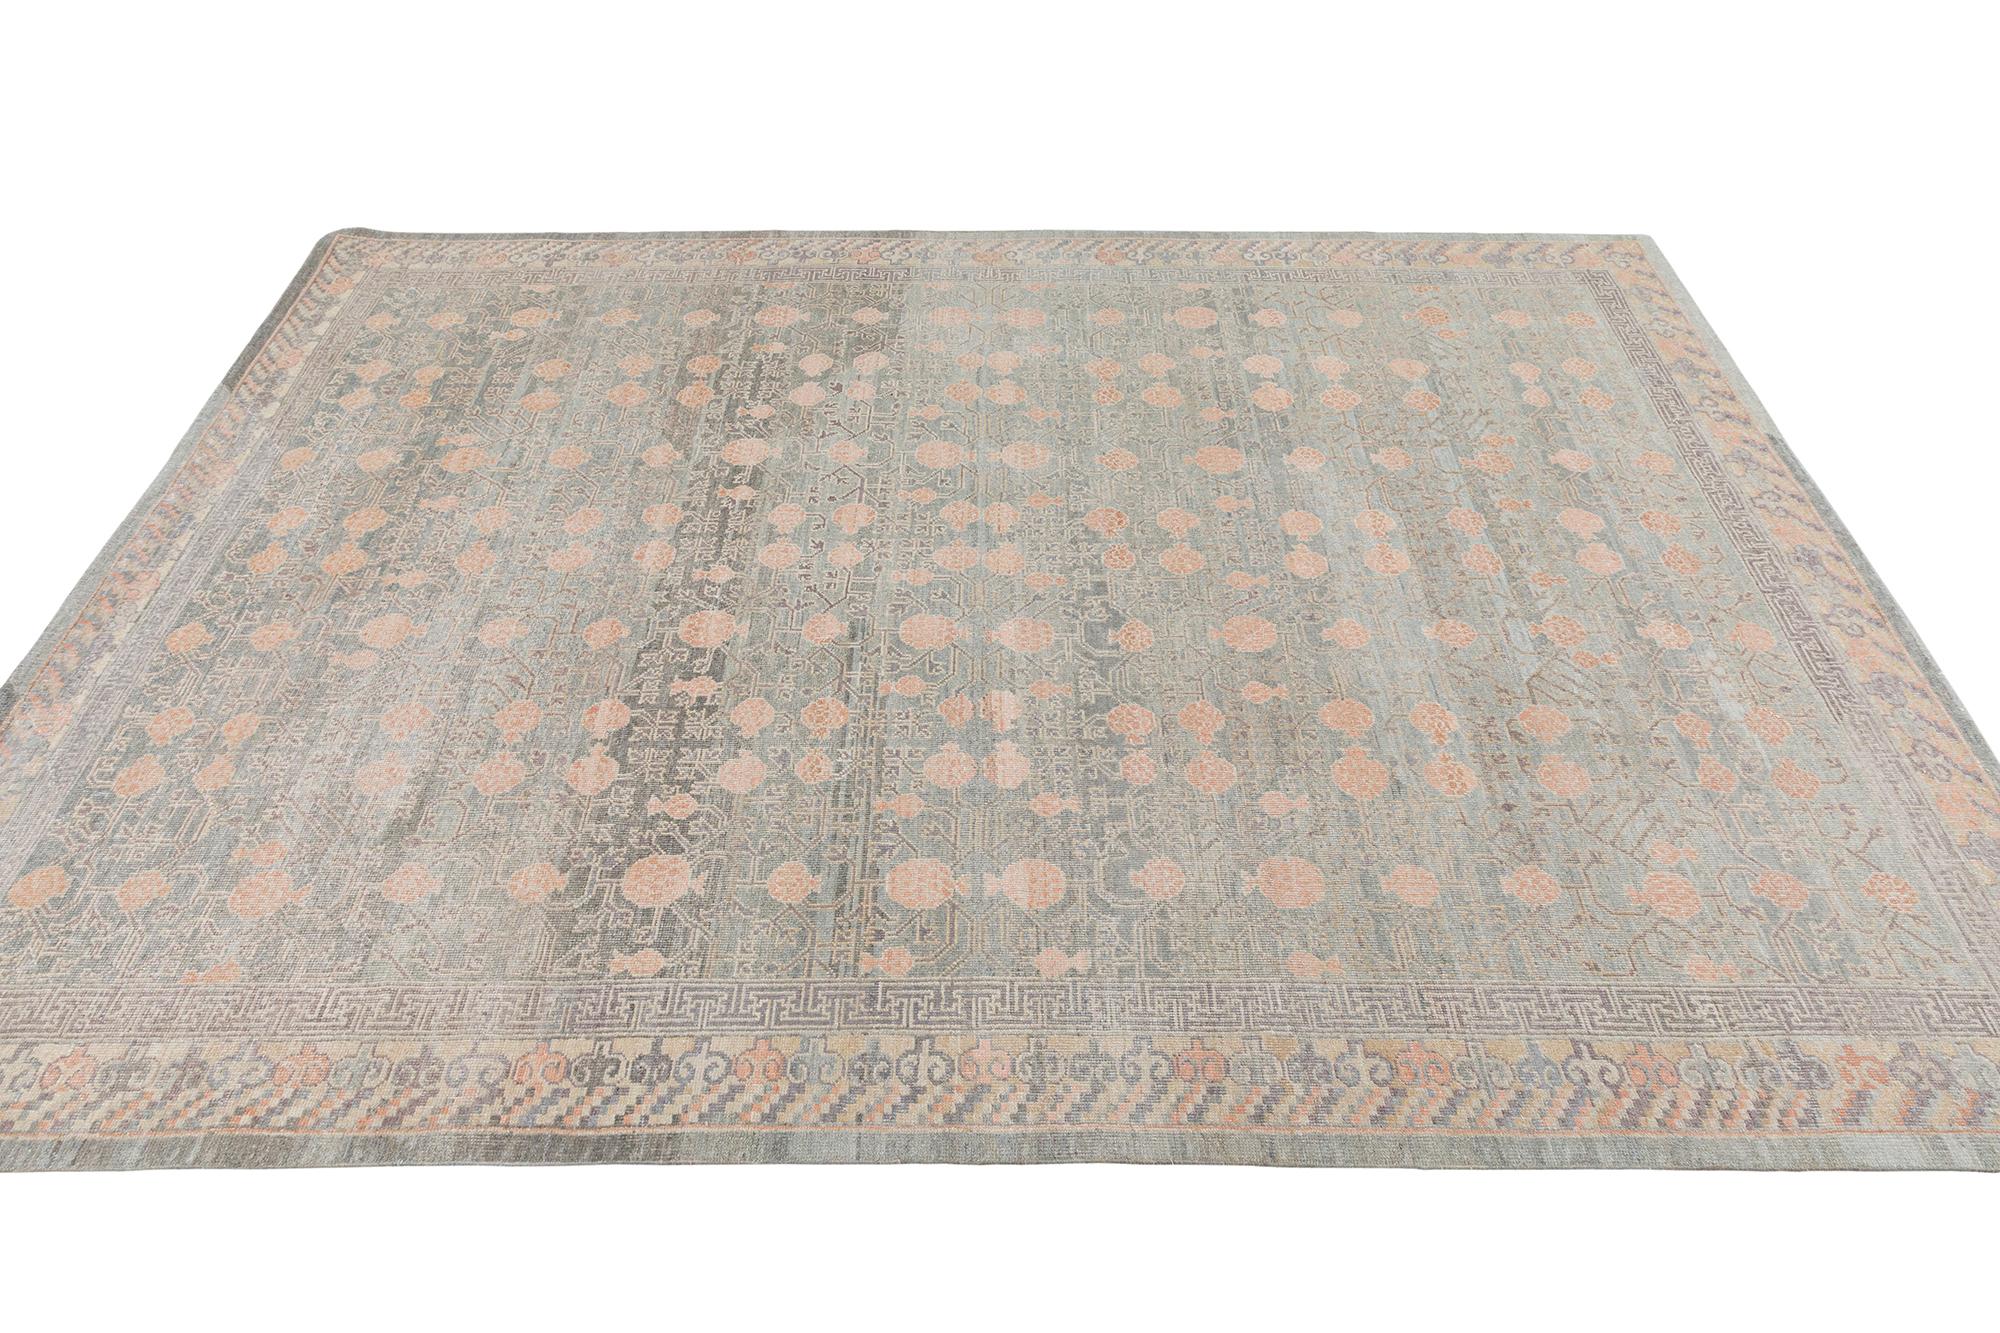 Decorative Handknotted Khotan Samarghand Style Rug with a Pomegranate Design  In Excellent Condition For Sale In New York, NY